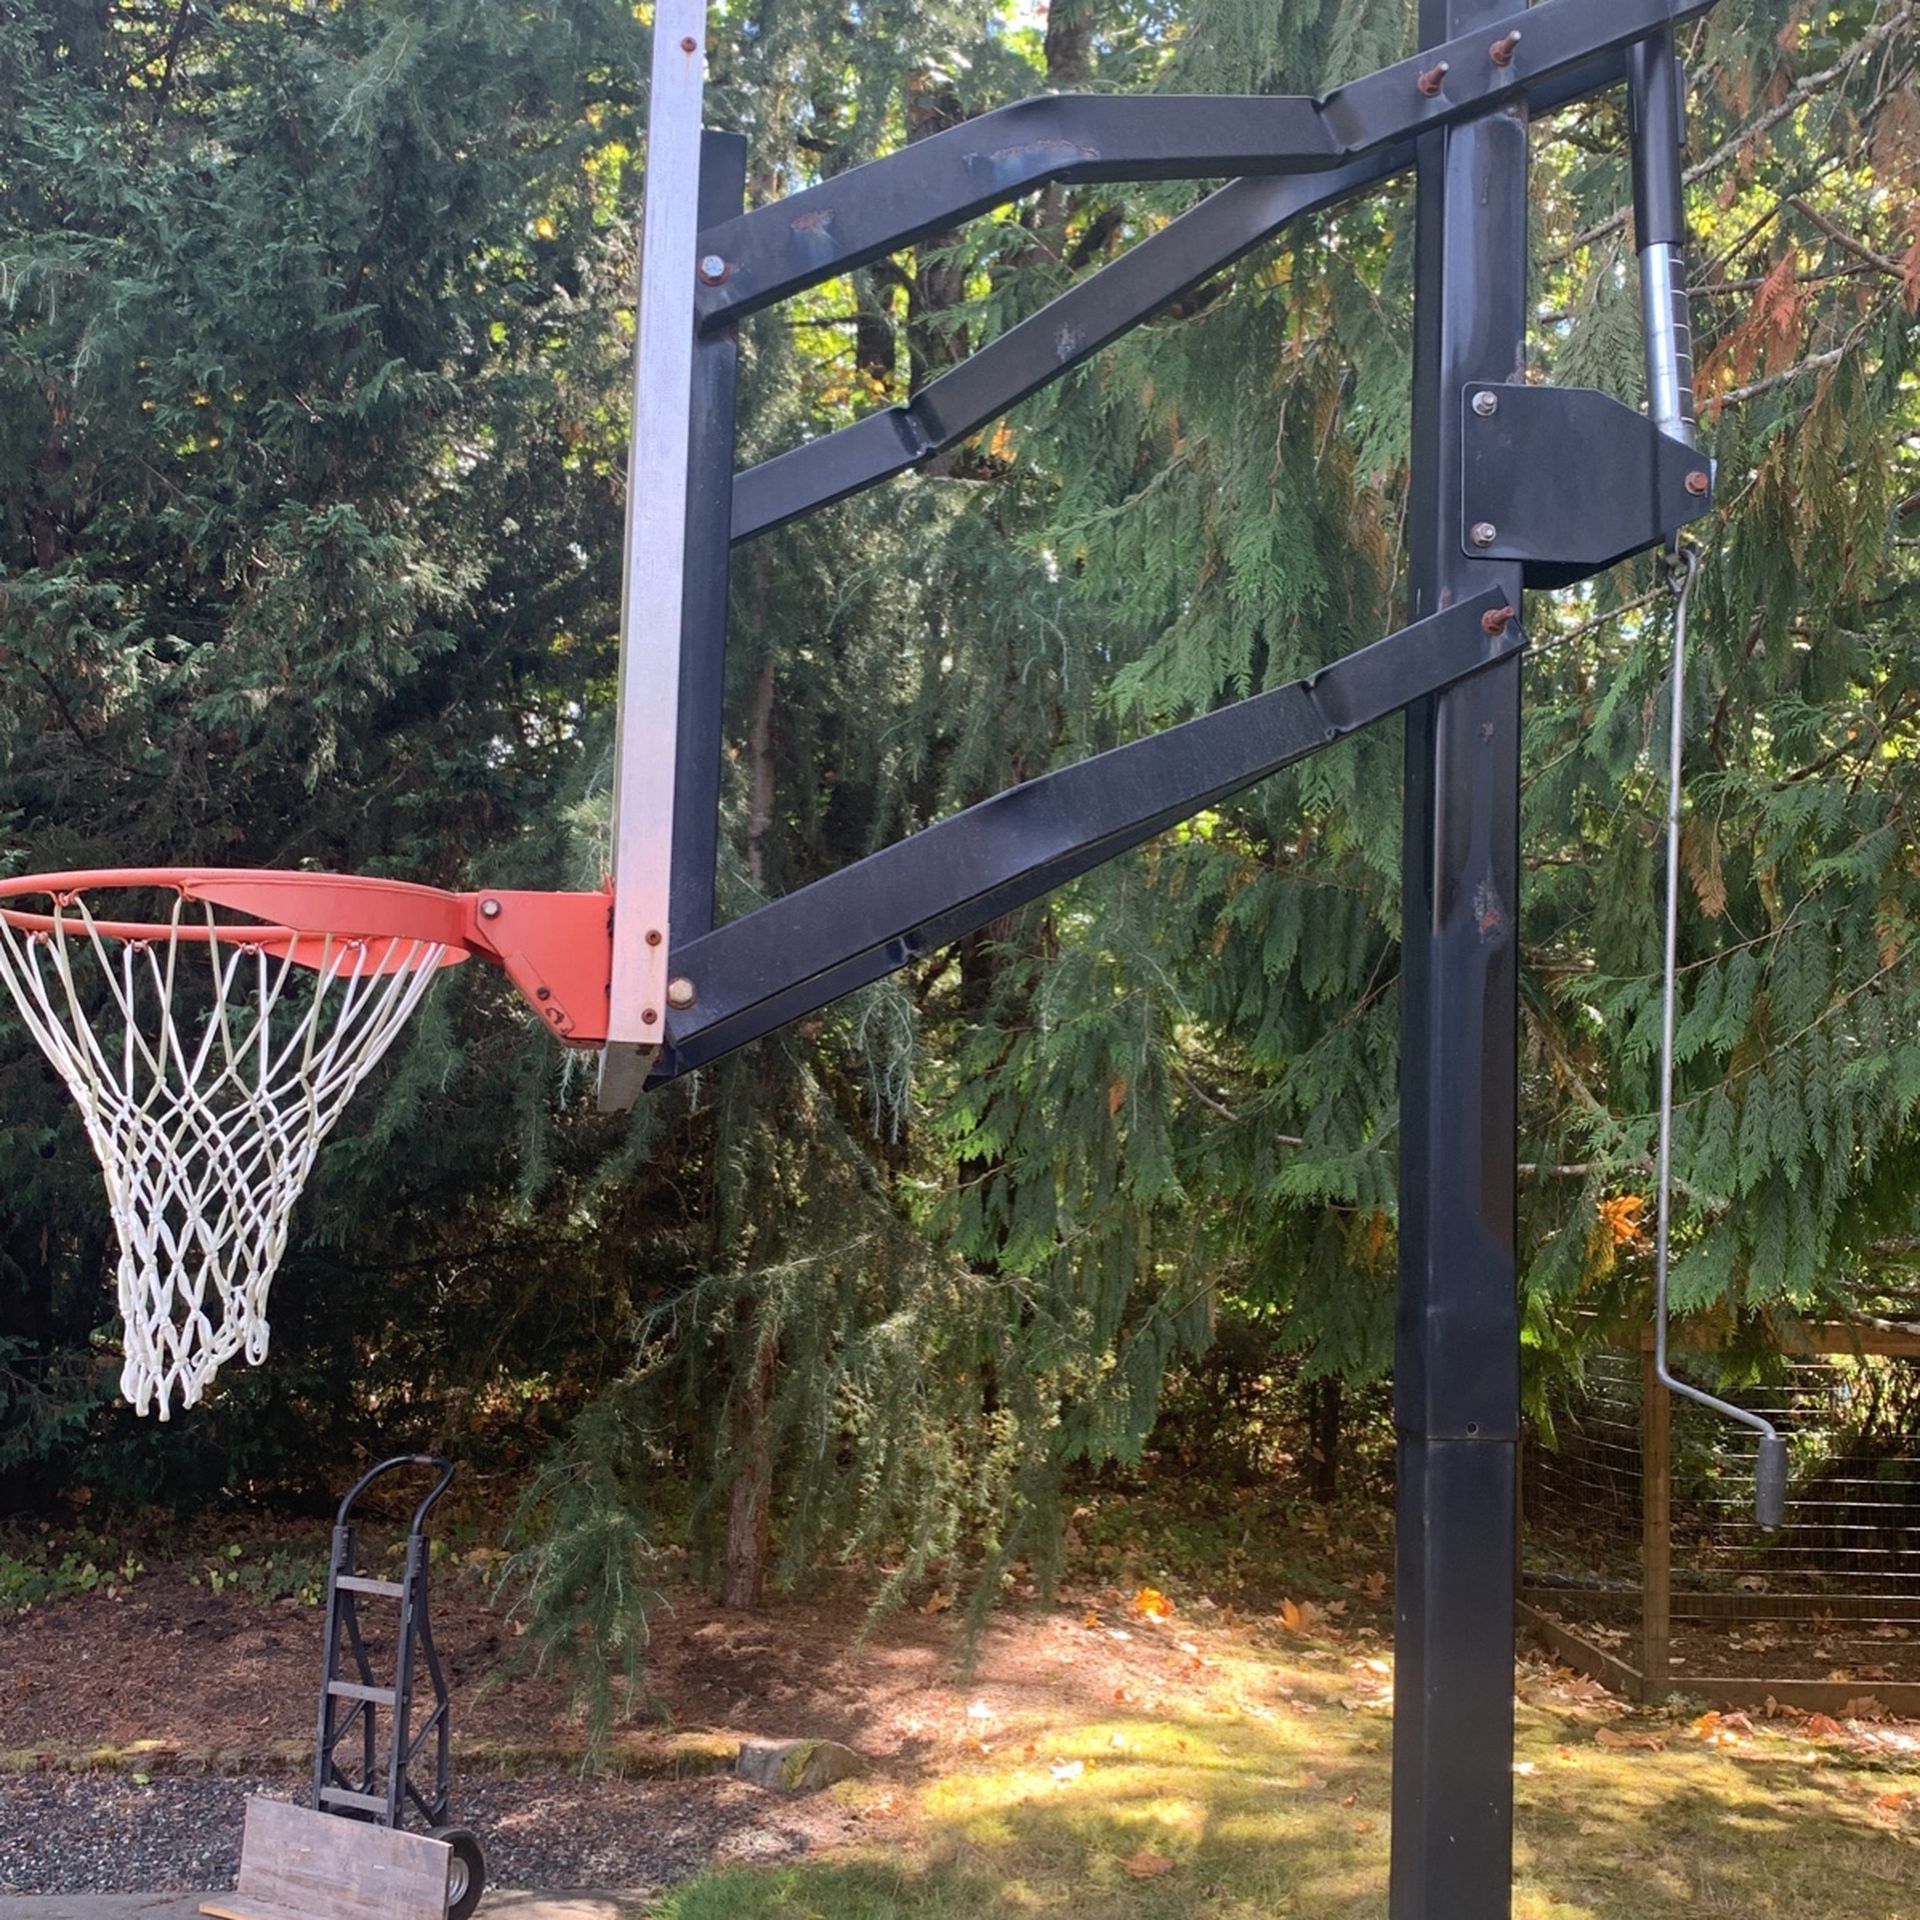 2 In-Ground Adjustable Basketball Hoops.  Will sell individually.